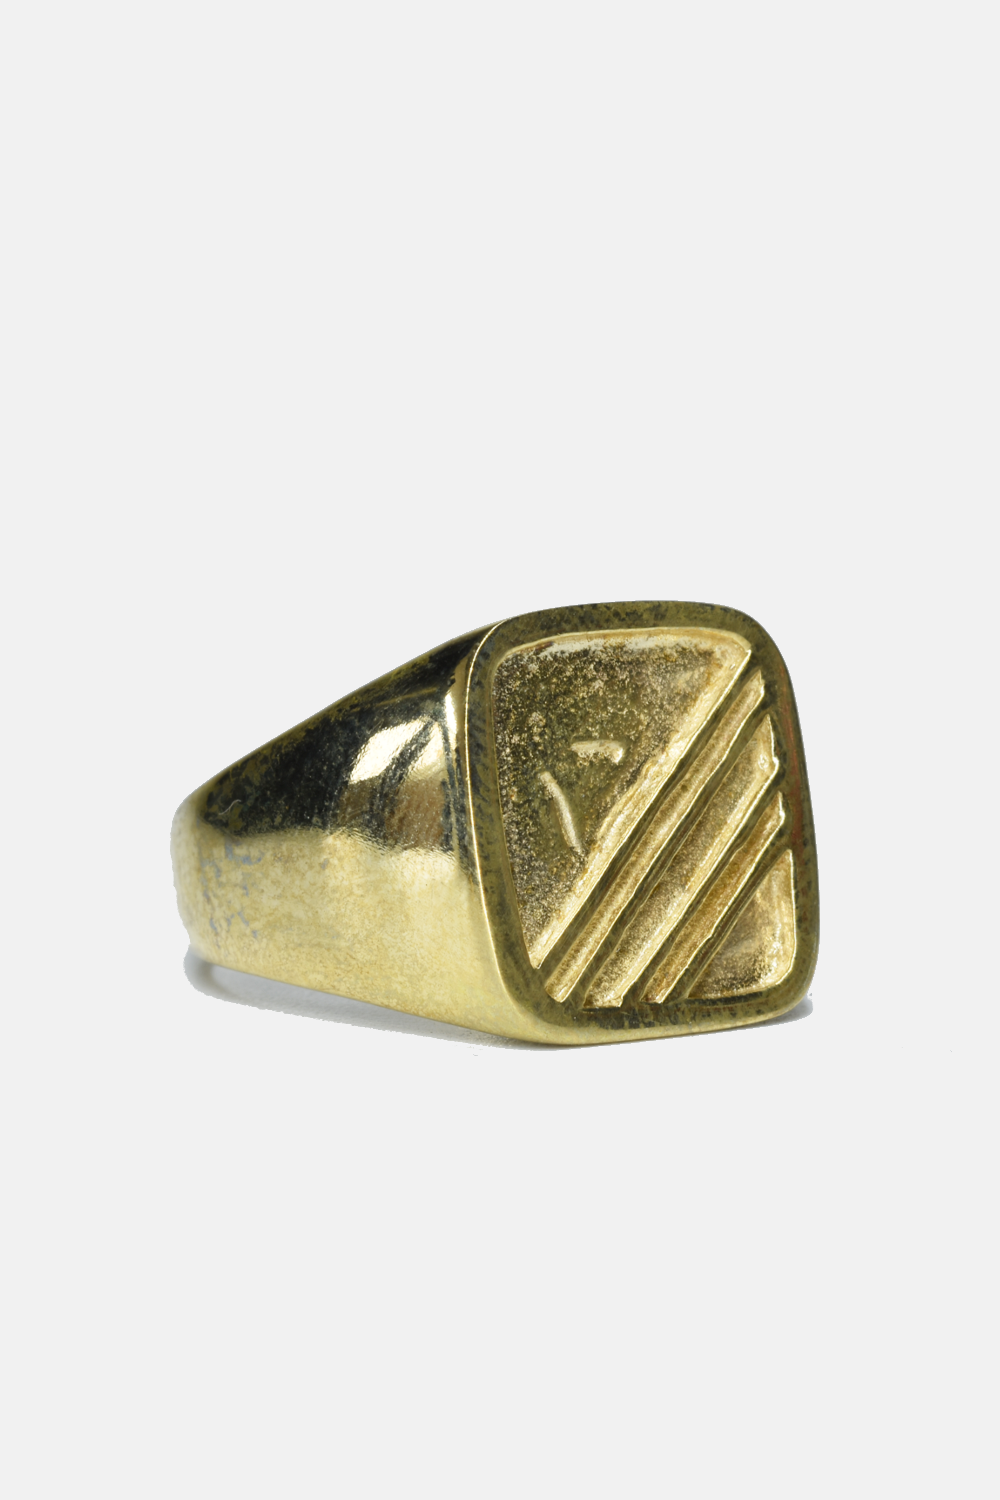 Curated Basics - Brass Square Striped Ring: 8